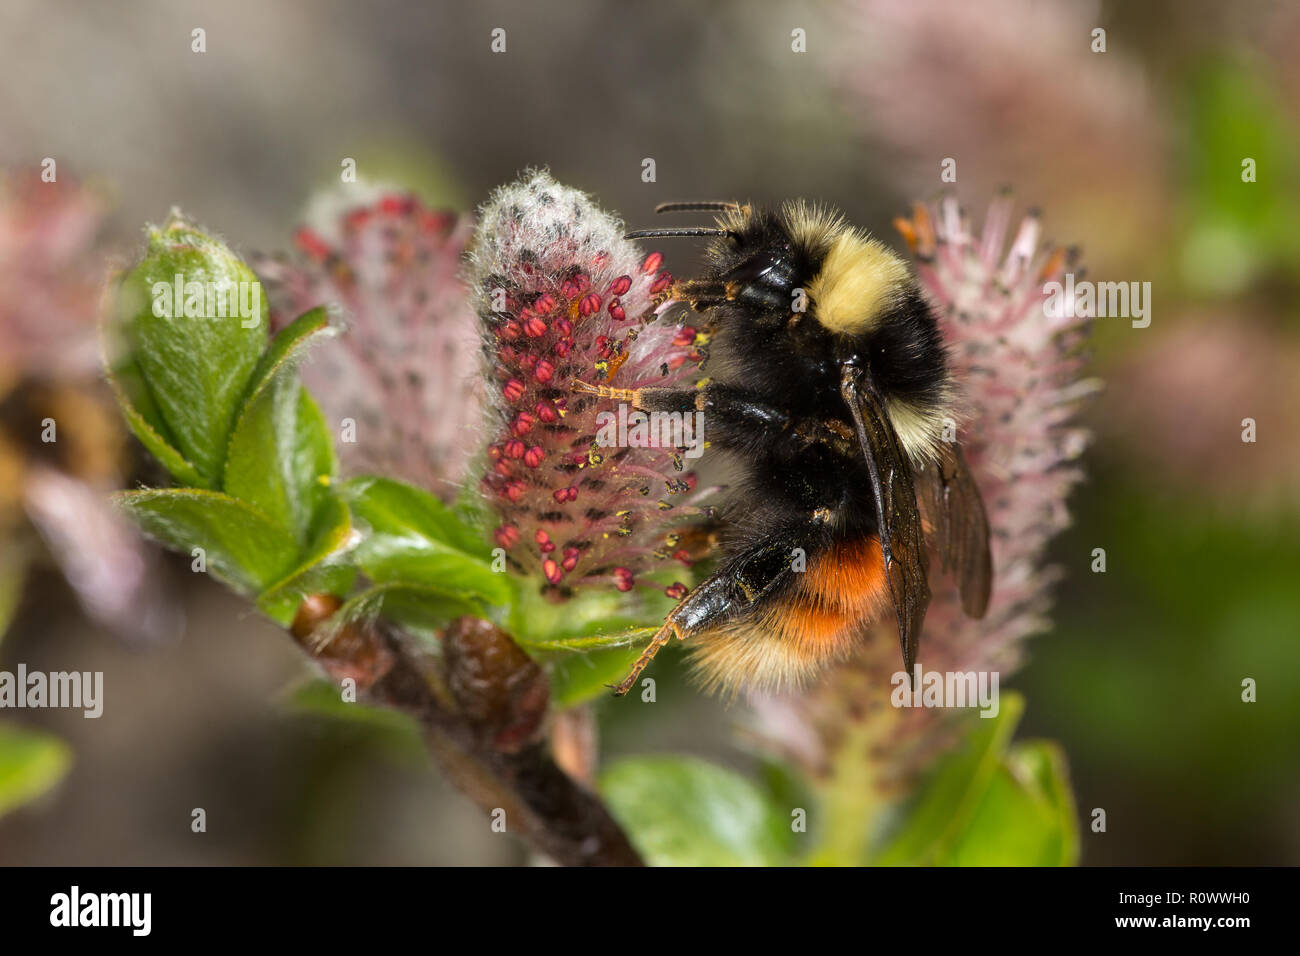 Bilberry Bumblebee, Bombus monticola, on Whortle-leaved willow catkins Stock Photo